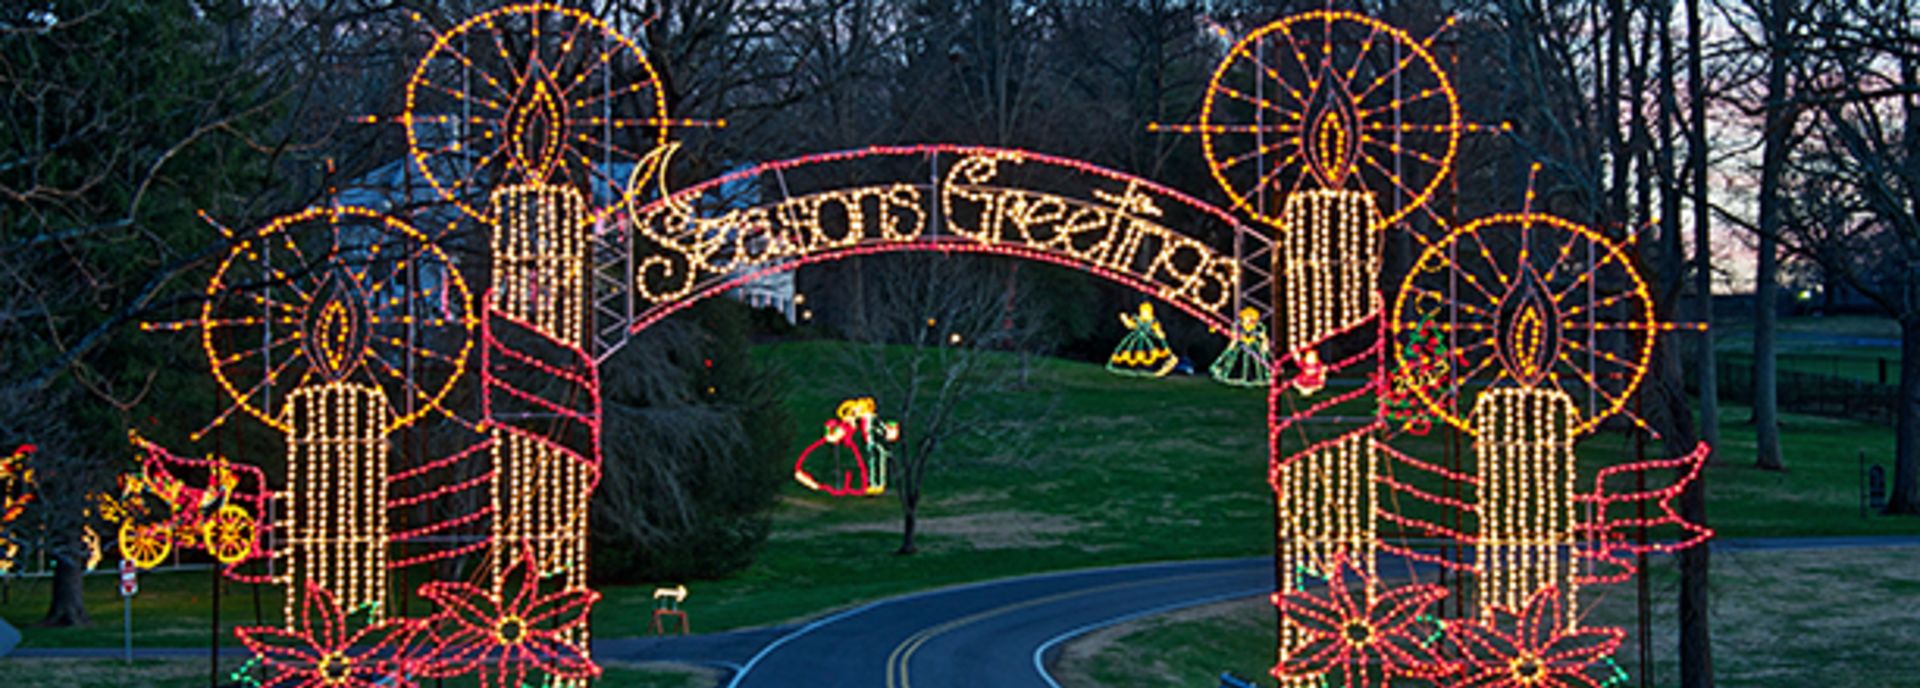 Best Places around Greensboro to see Christmas Lights!